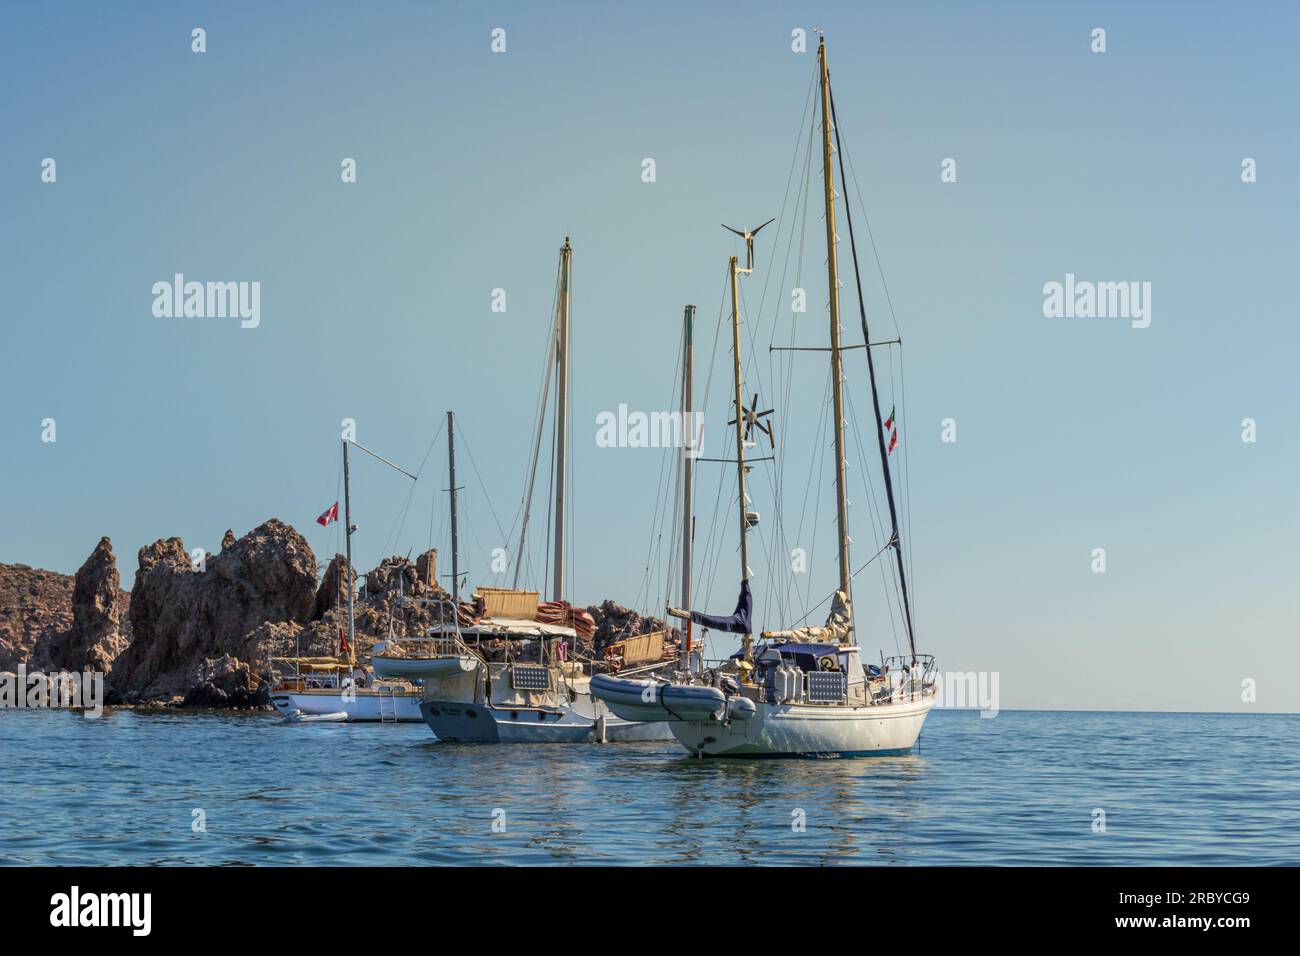 Three cruising sailboats, a schooner and two ketches, anchored in the calm bay aff San Juanico, Baja California Sur, Mexico. Stock Photo